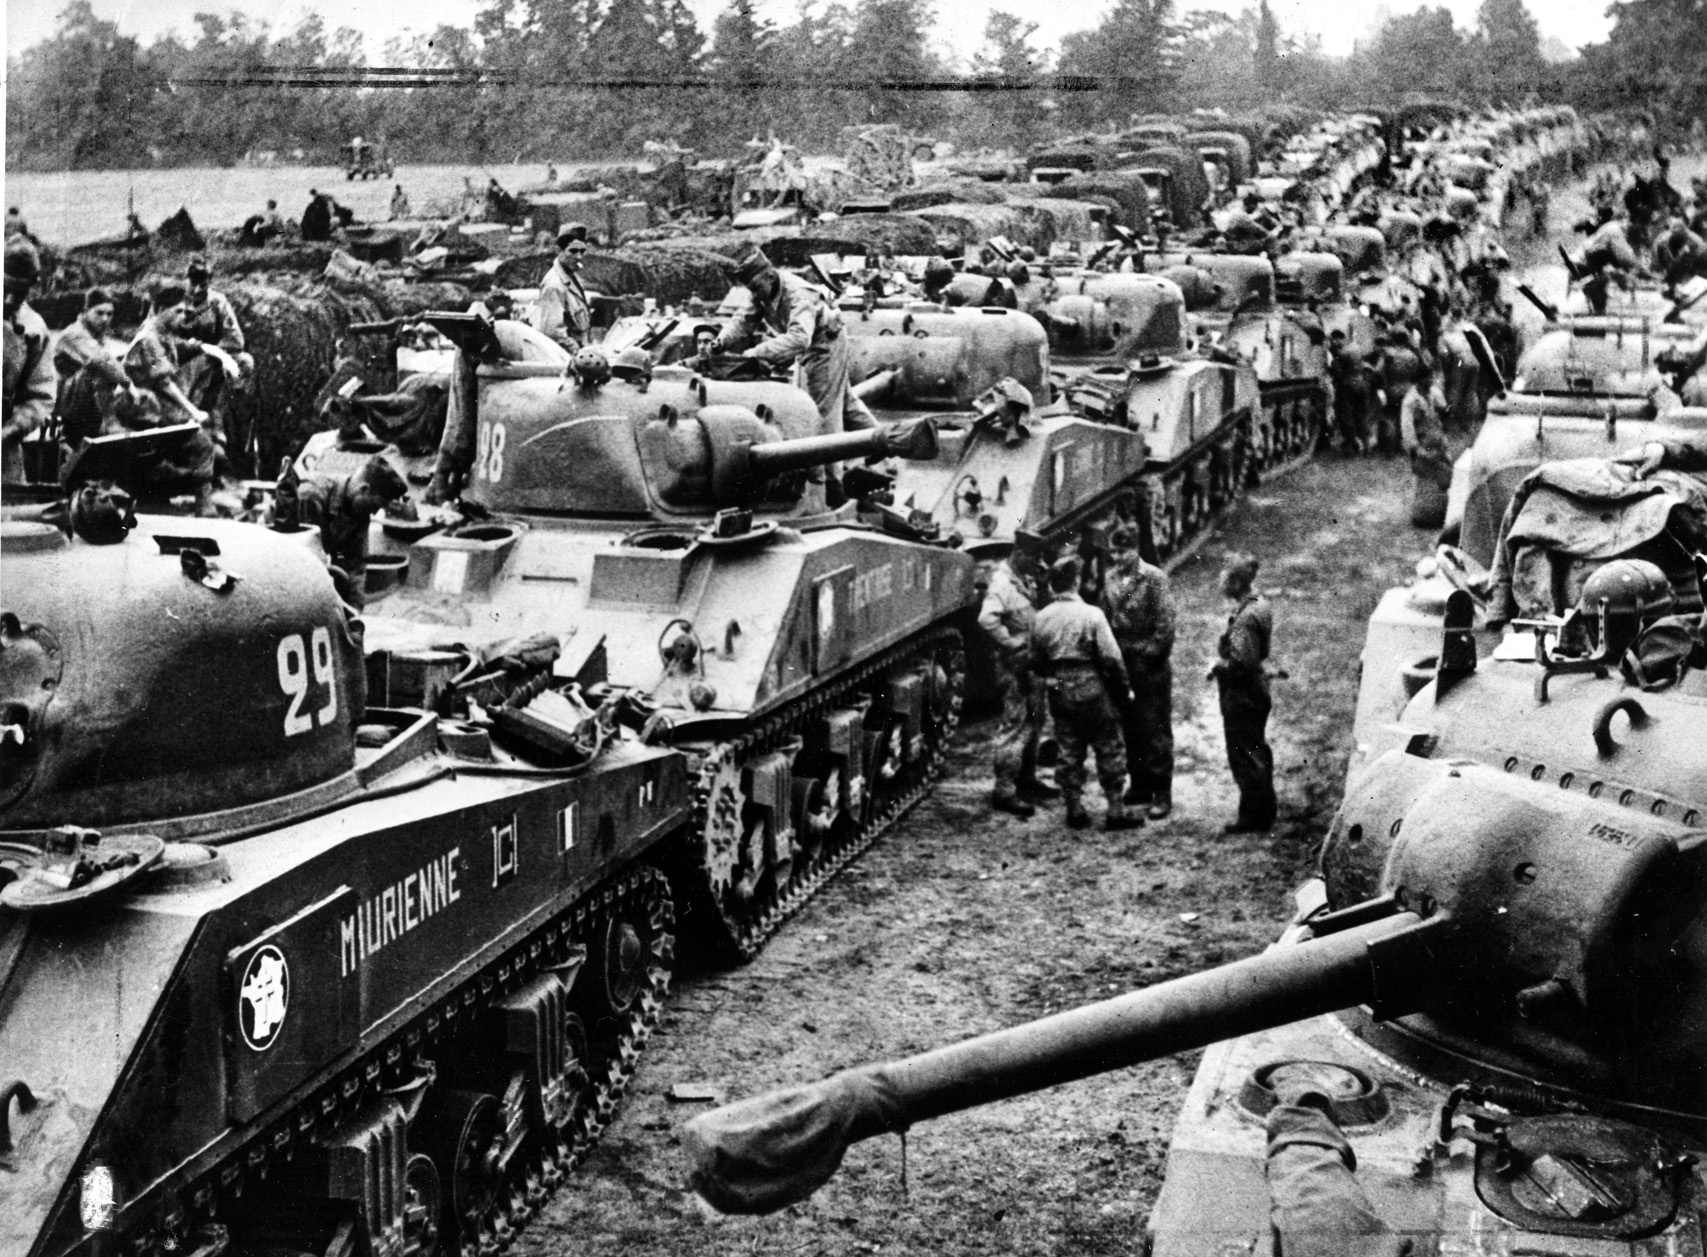 The U.S. supplied Sherman tanks to Leclerc's French 2nd Armored Division, shown here assembling after arriving at Utah Beach in Normandy on August 1, 1944.